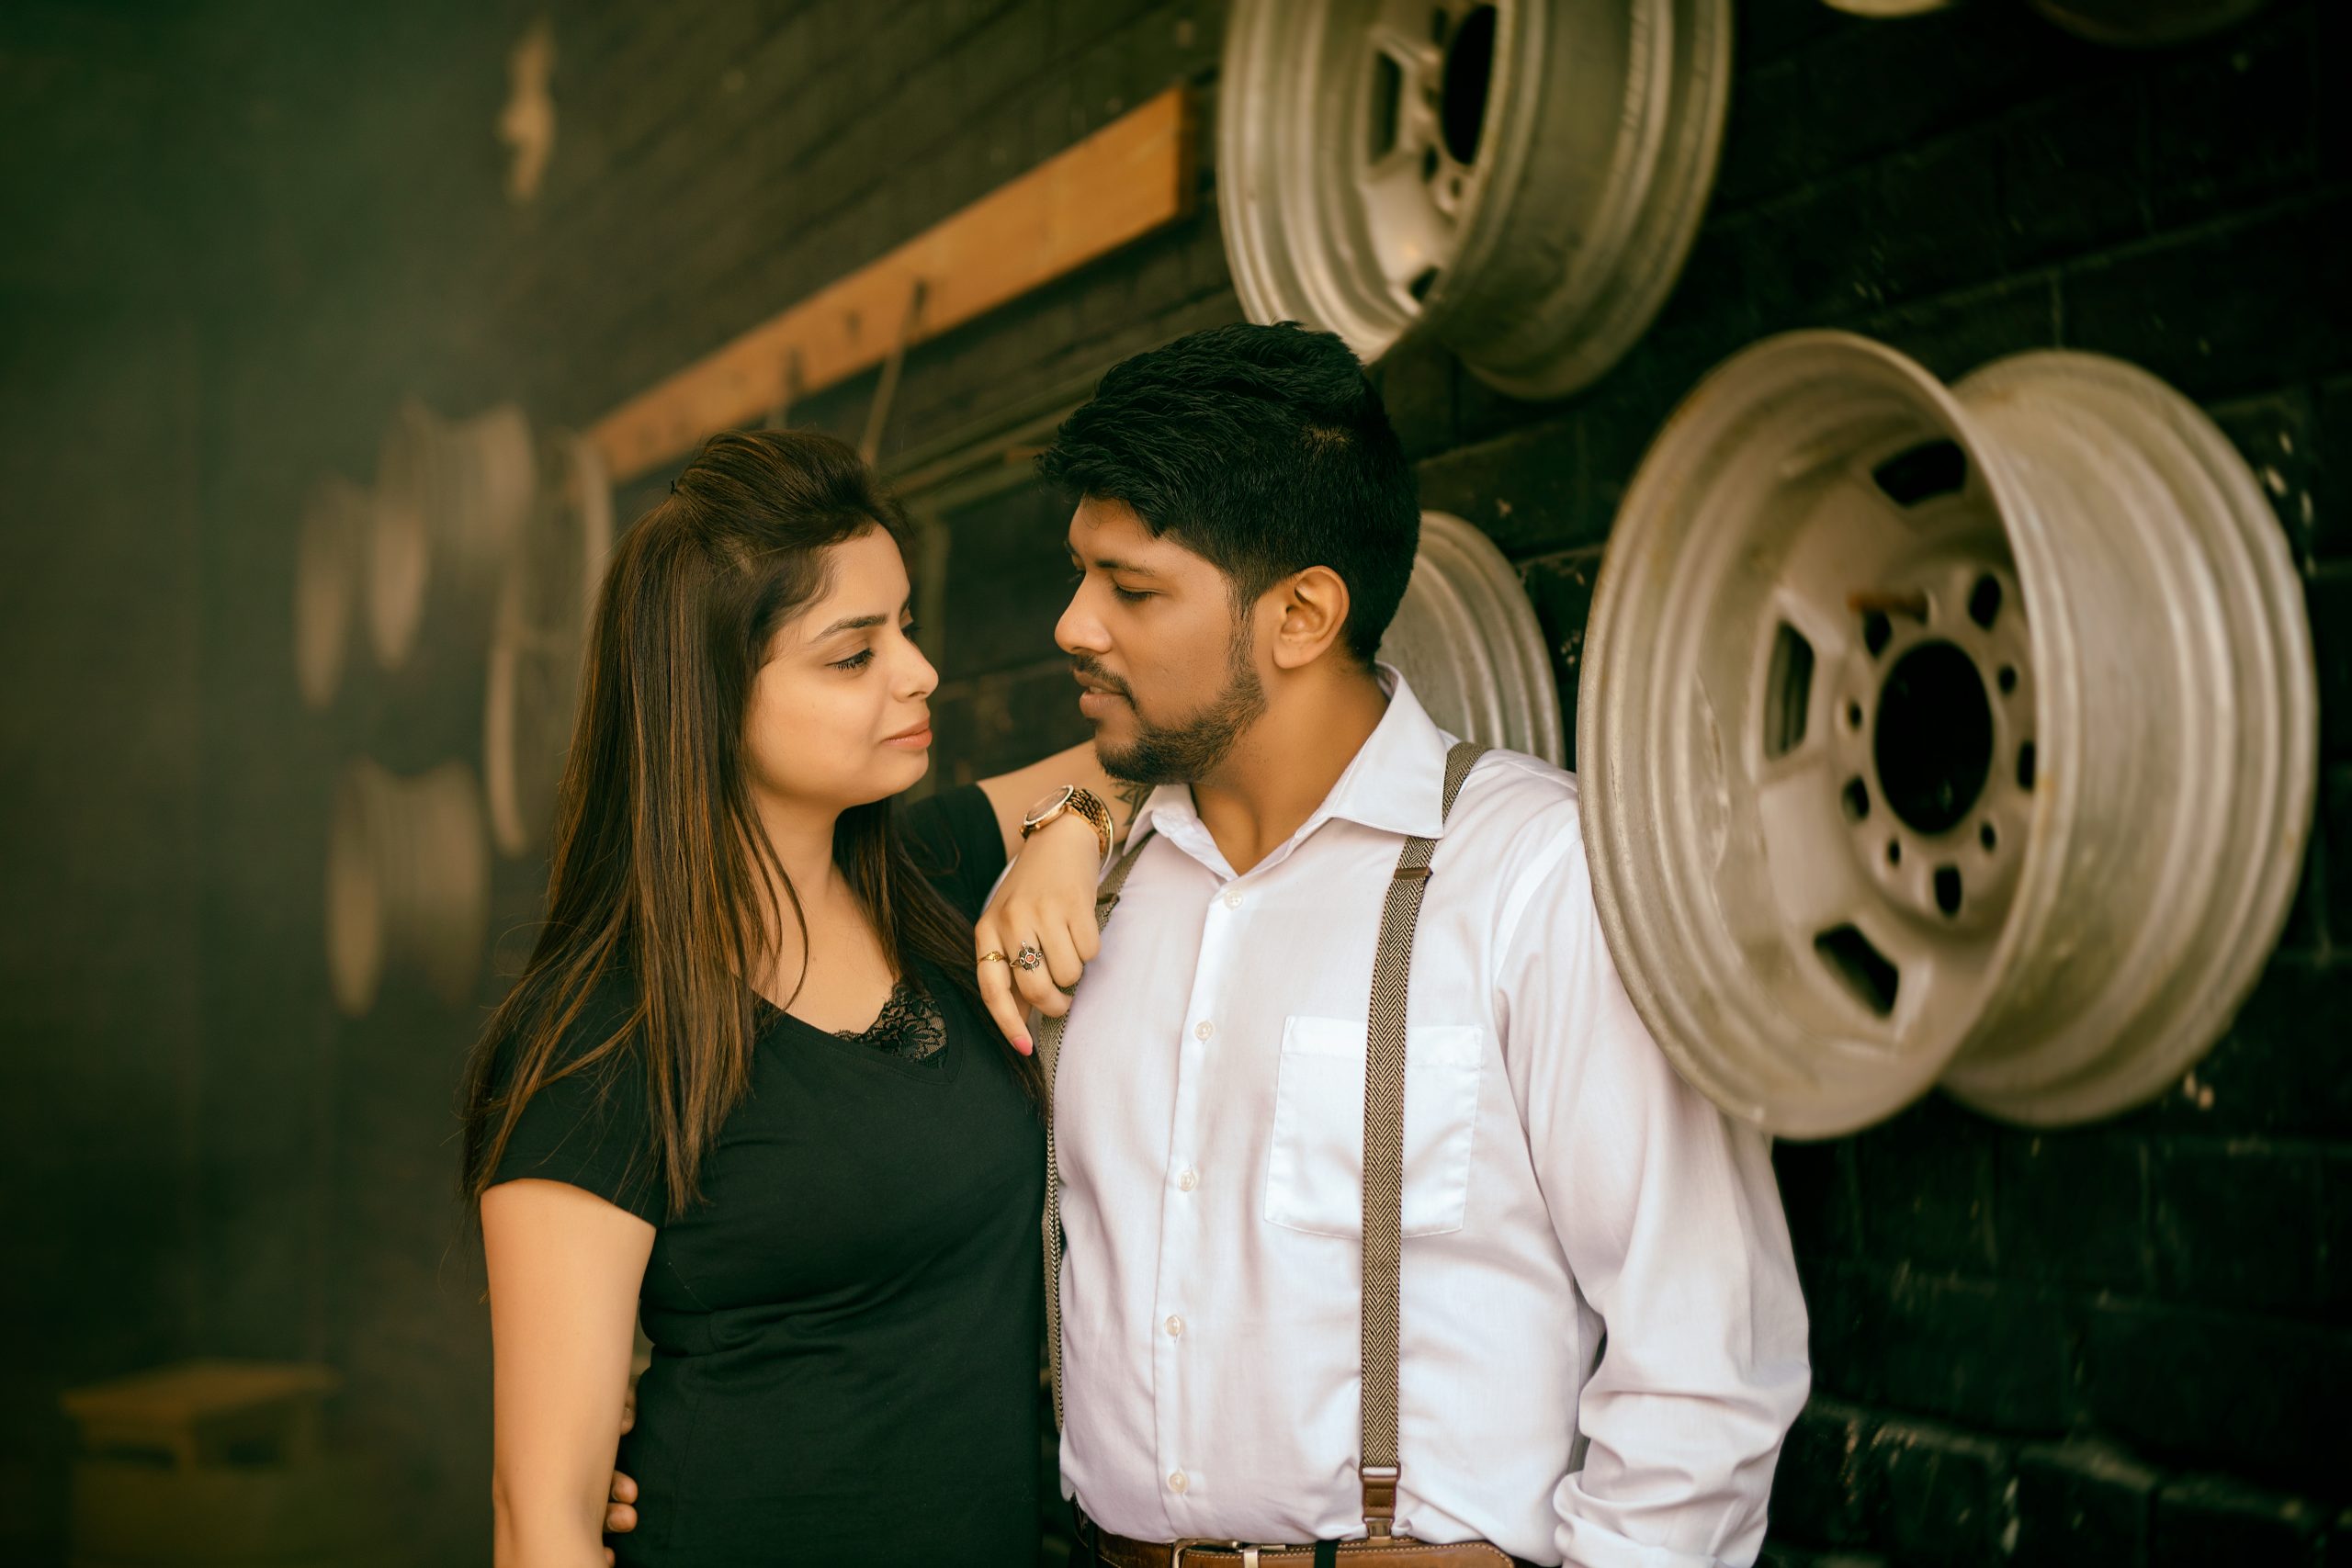 Viral wedding photoshoot | [PHOTOS] Couple poses for roadside post-wedding  photo shoot after car breaks down | Trending & Viral News